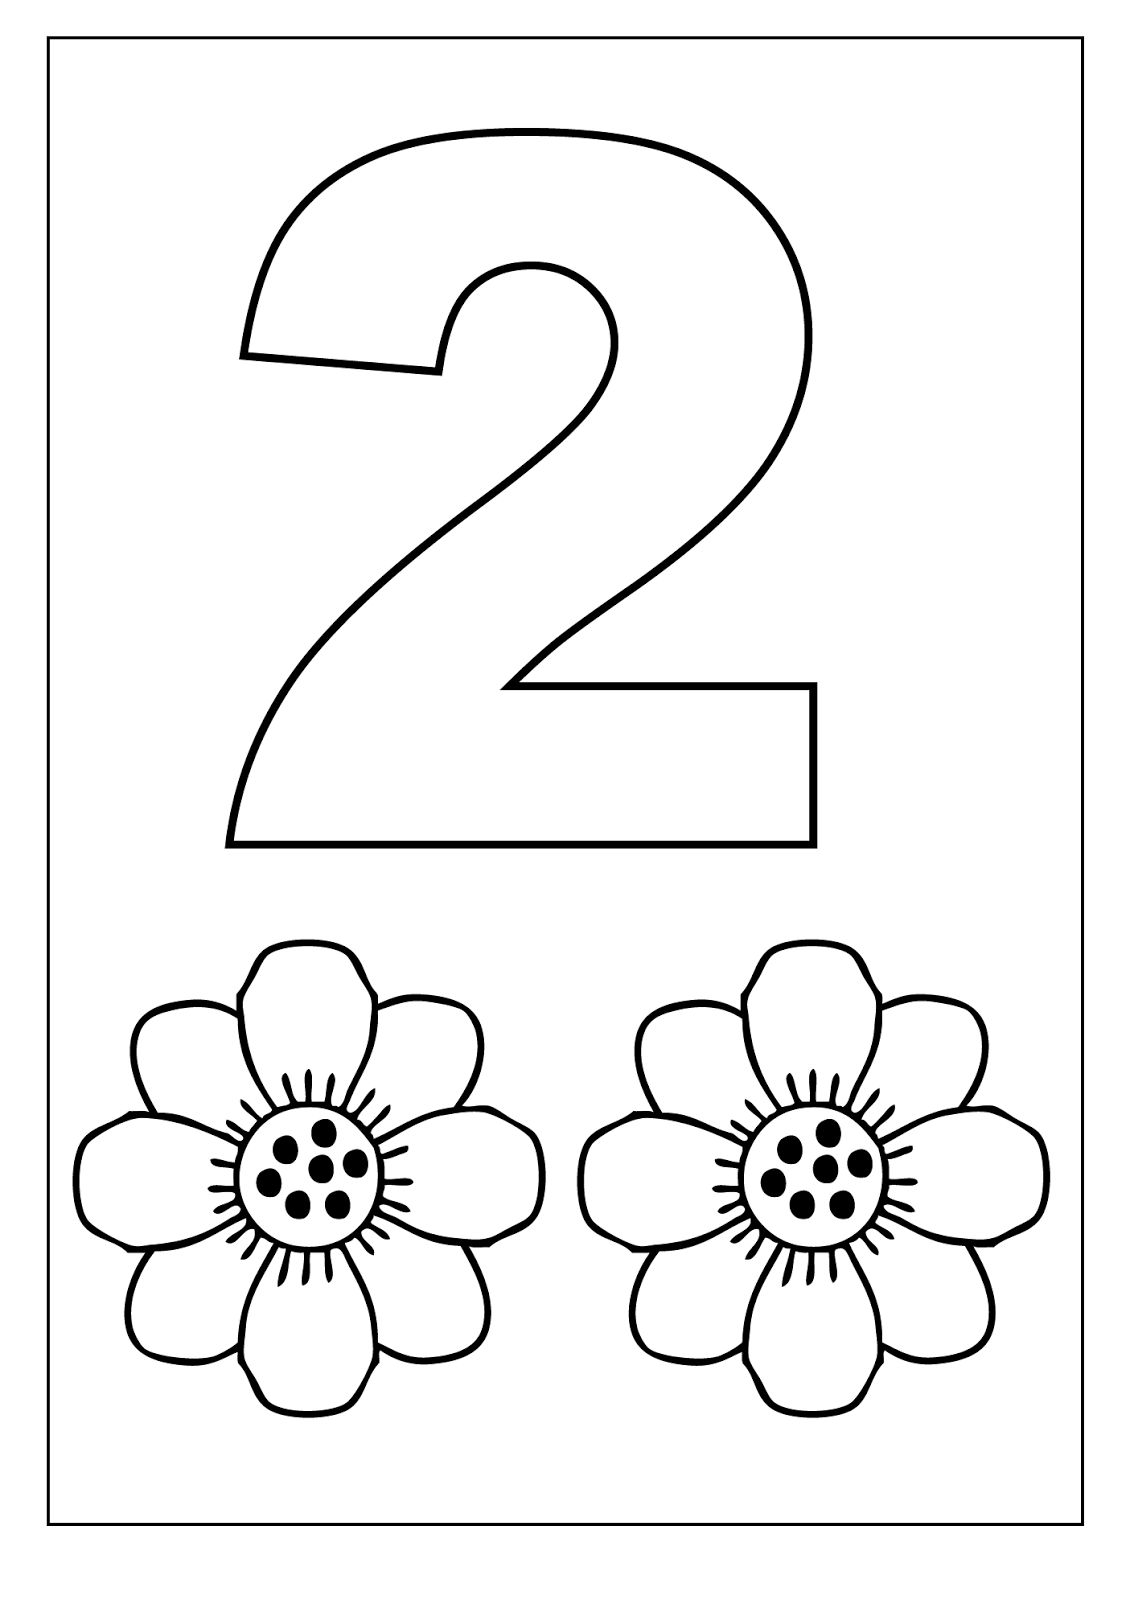 worksheets for 2 year olds number 2